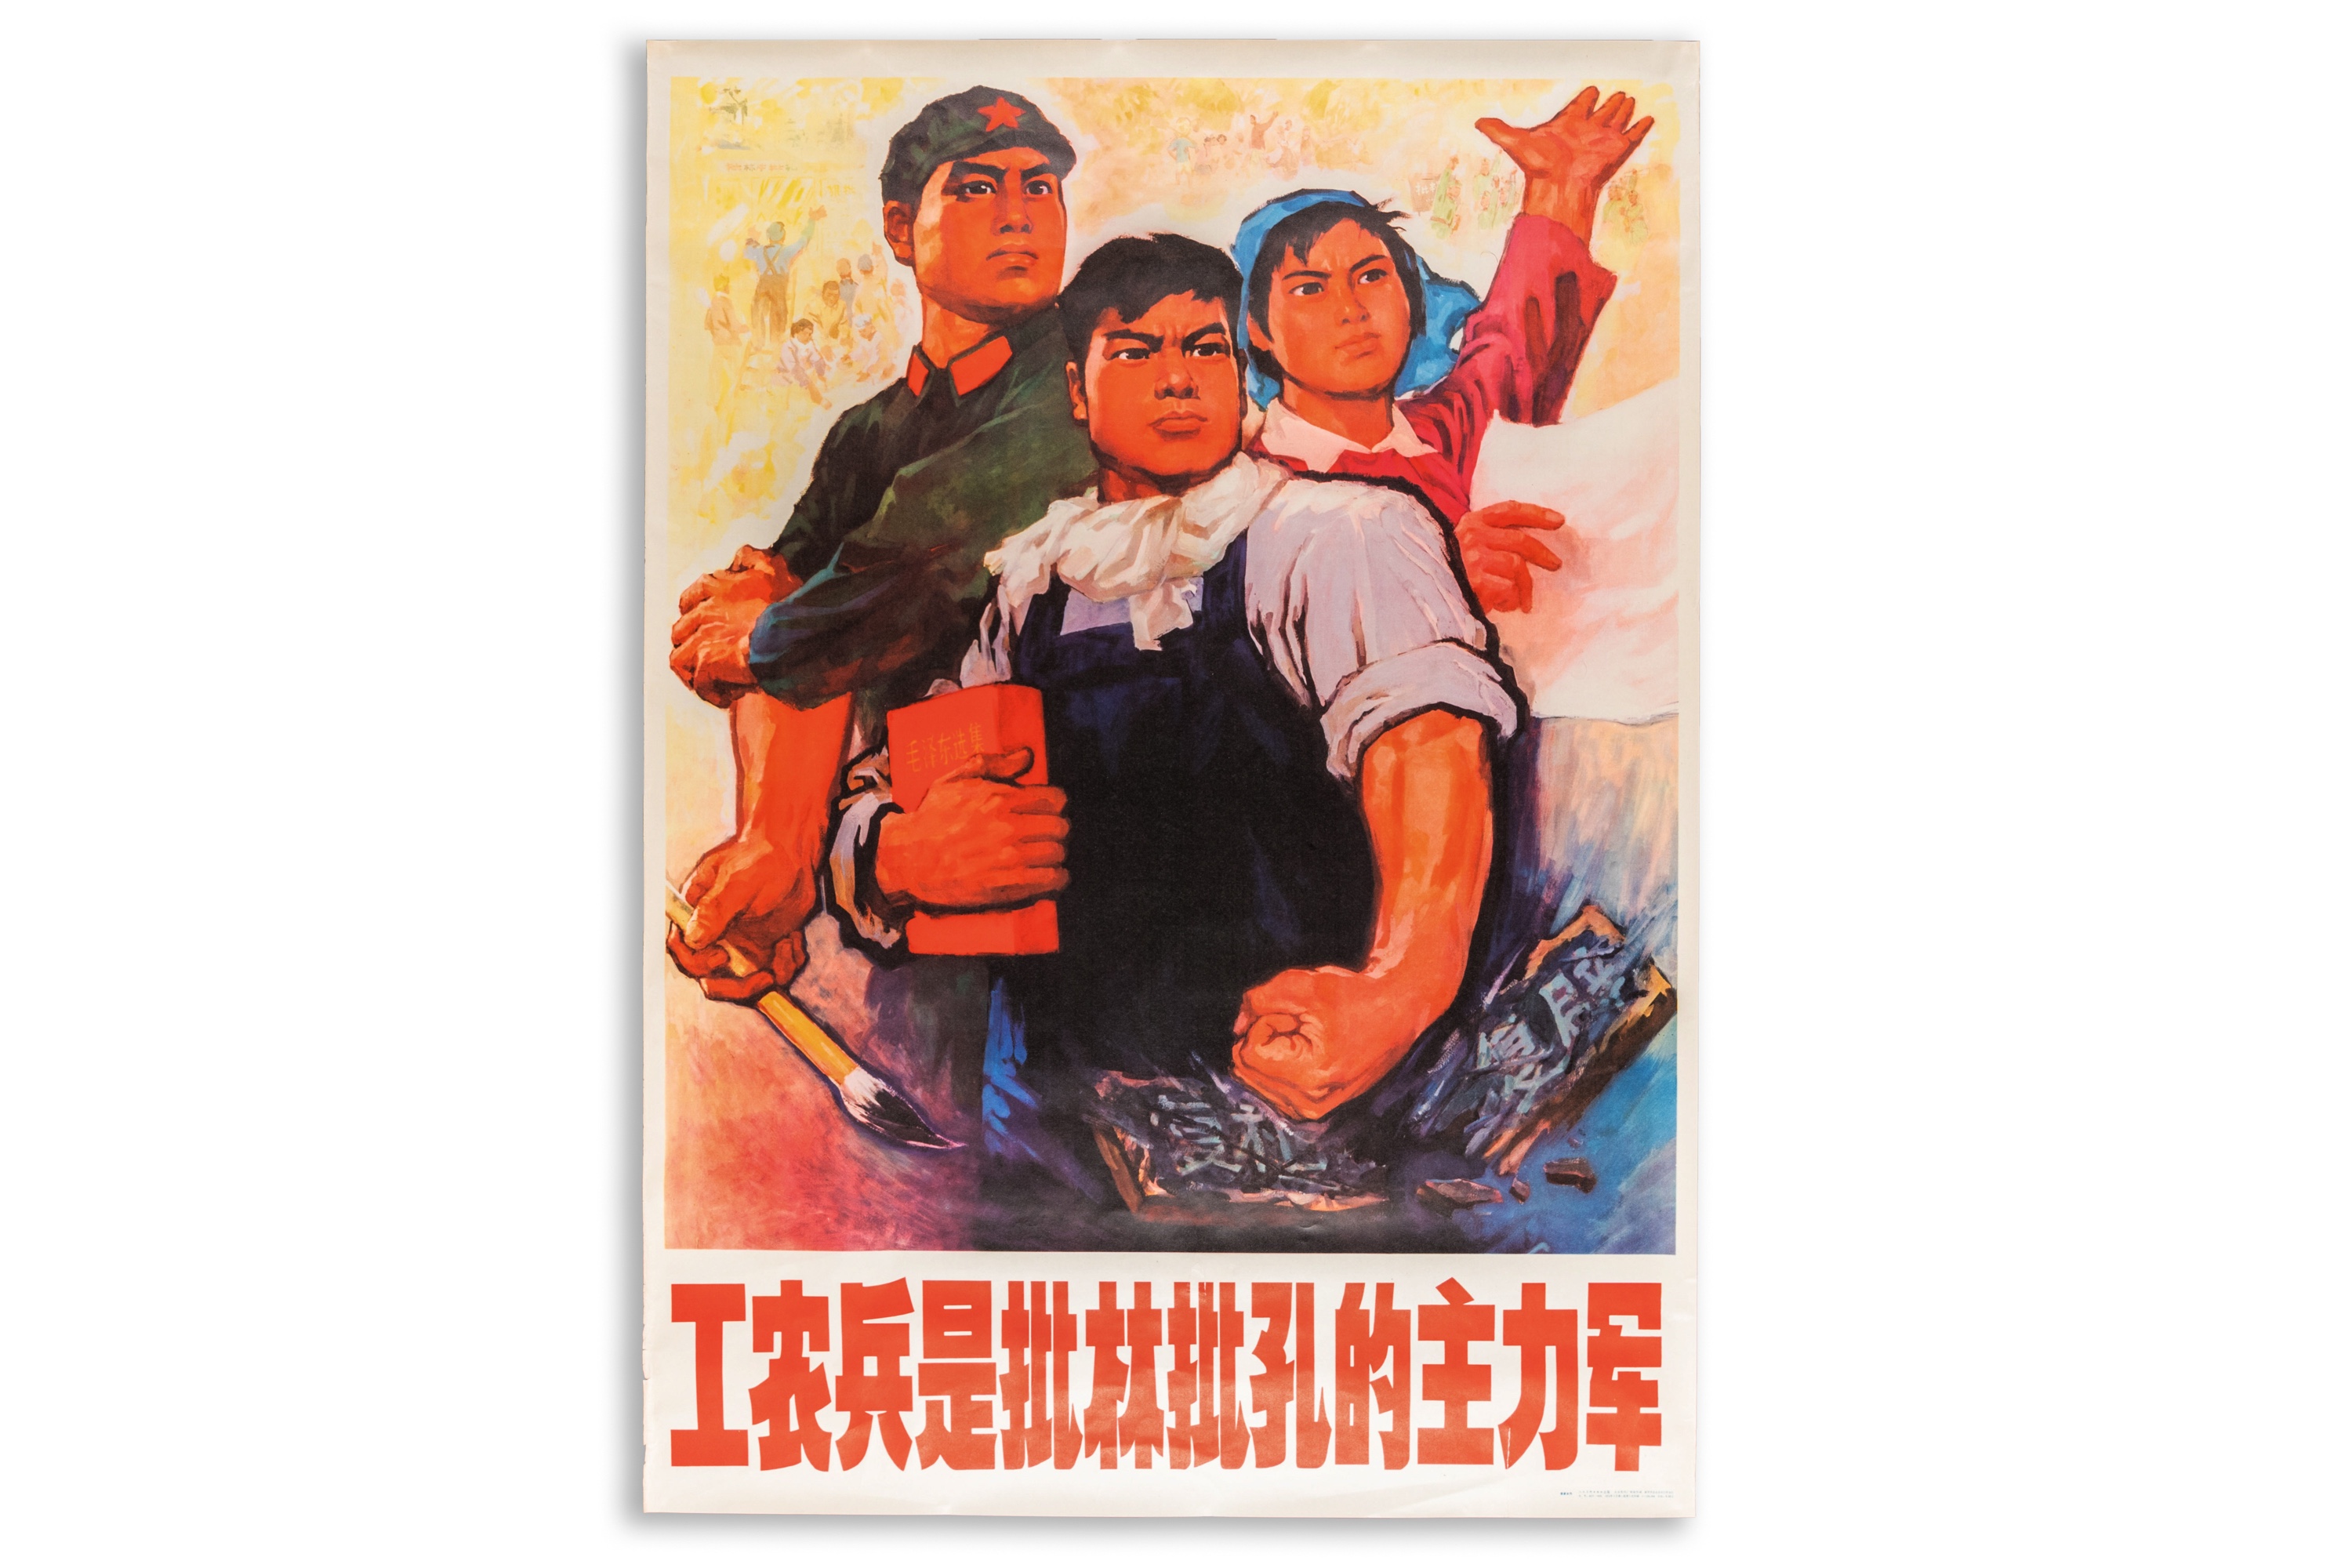 21 Chinese Cultural Revolution propaganda posters - Image 58 of 60